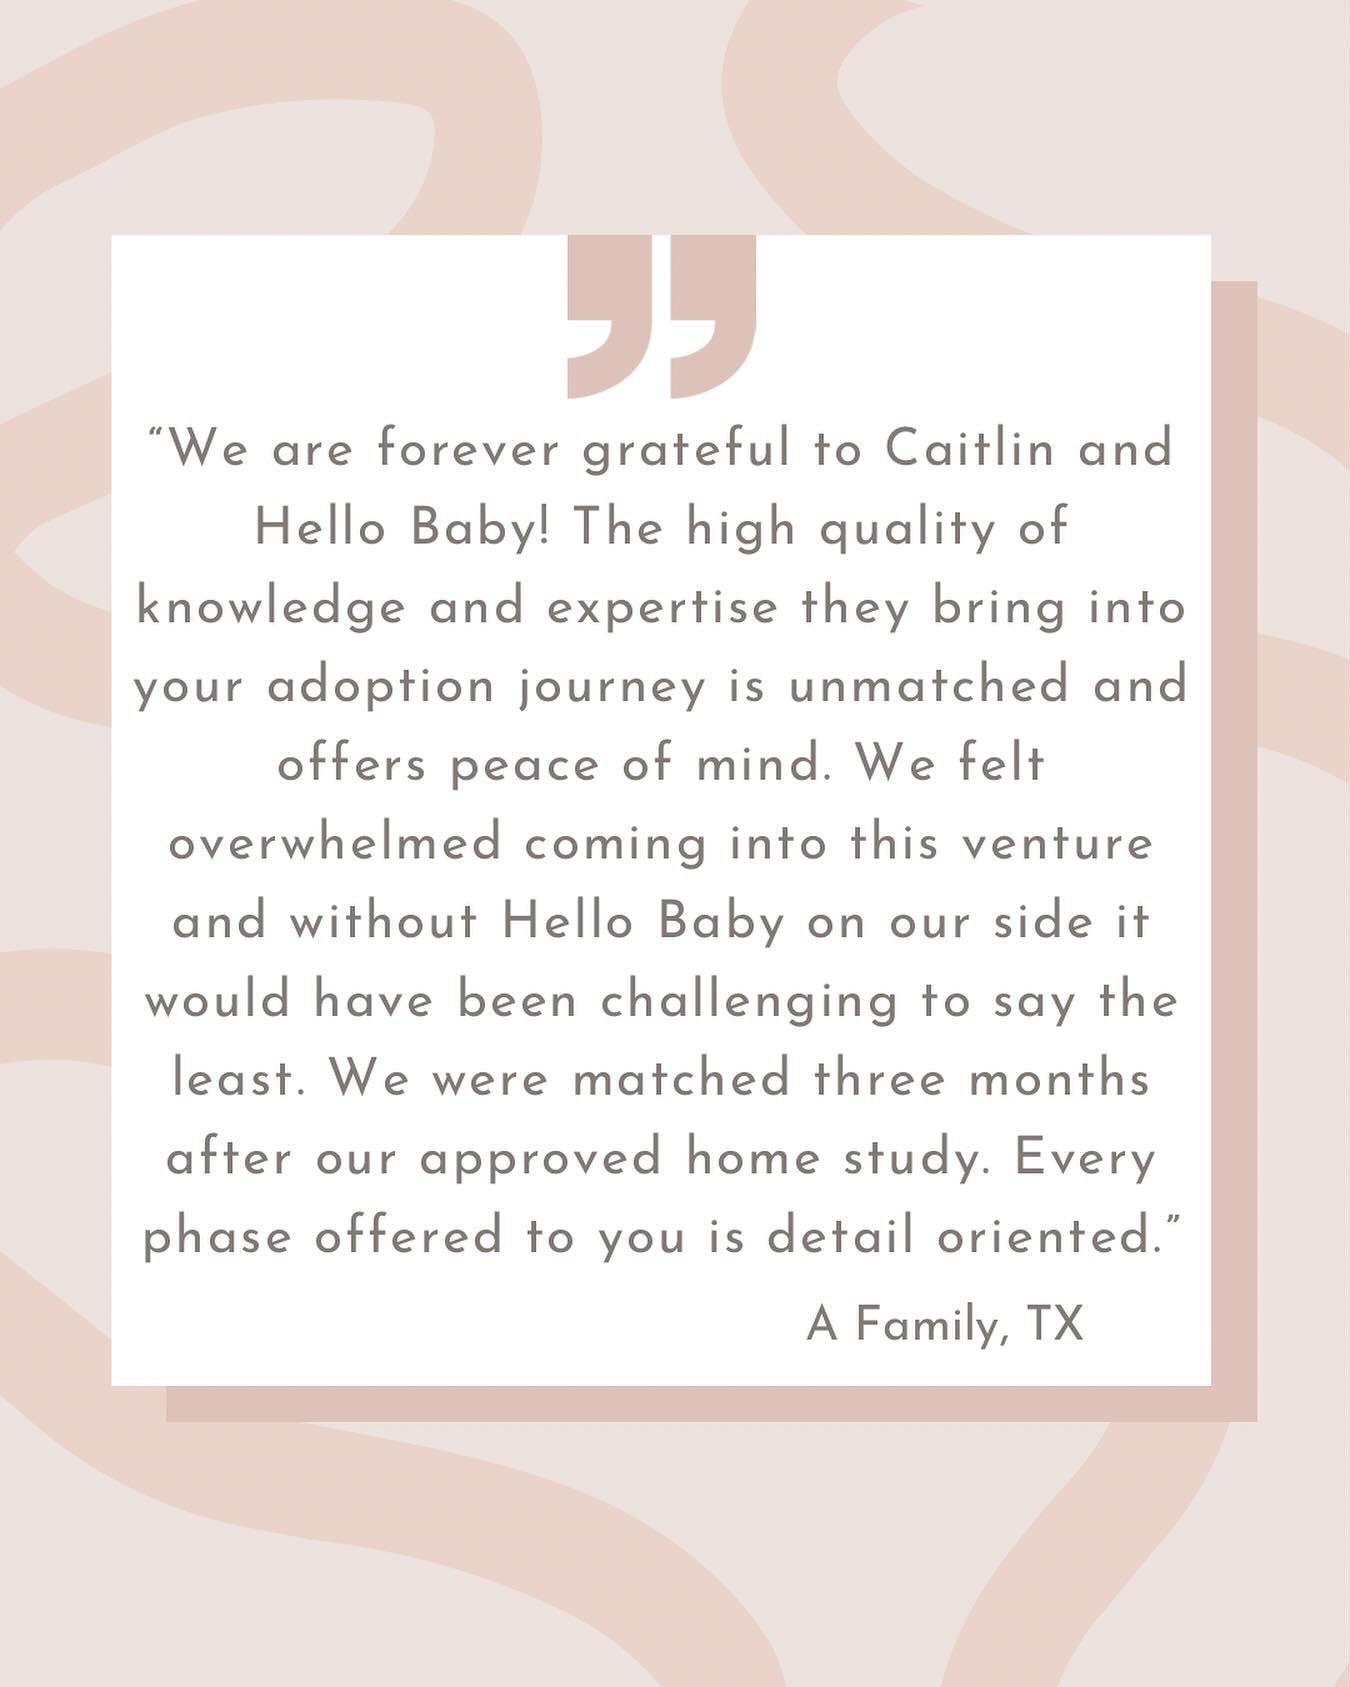 &ldquo;We are forever grateful to Caitlin and Hello Baby! The high quality of knowledge and expertise they bring into your adoption journey is unmatched and offers peace of mind. We felt overwhelmed coming into this venture and without Hello Baby on 